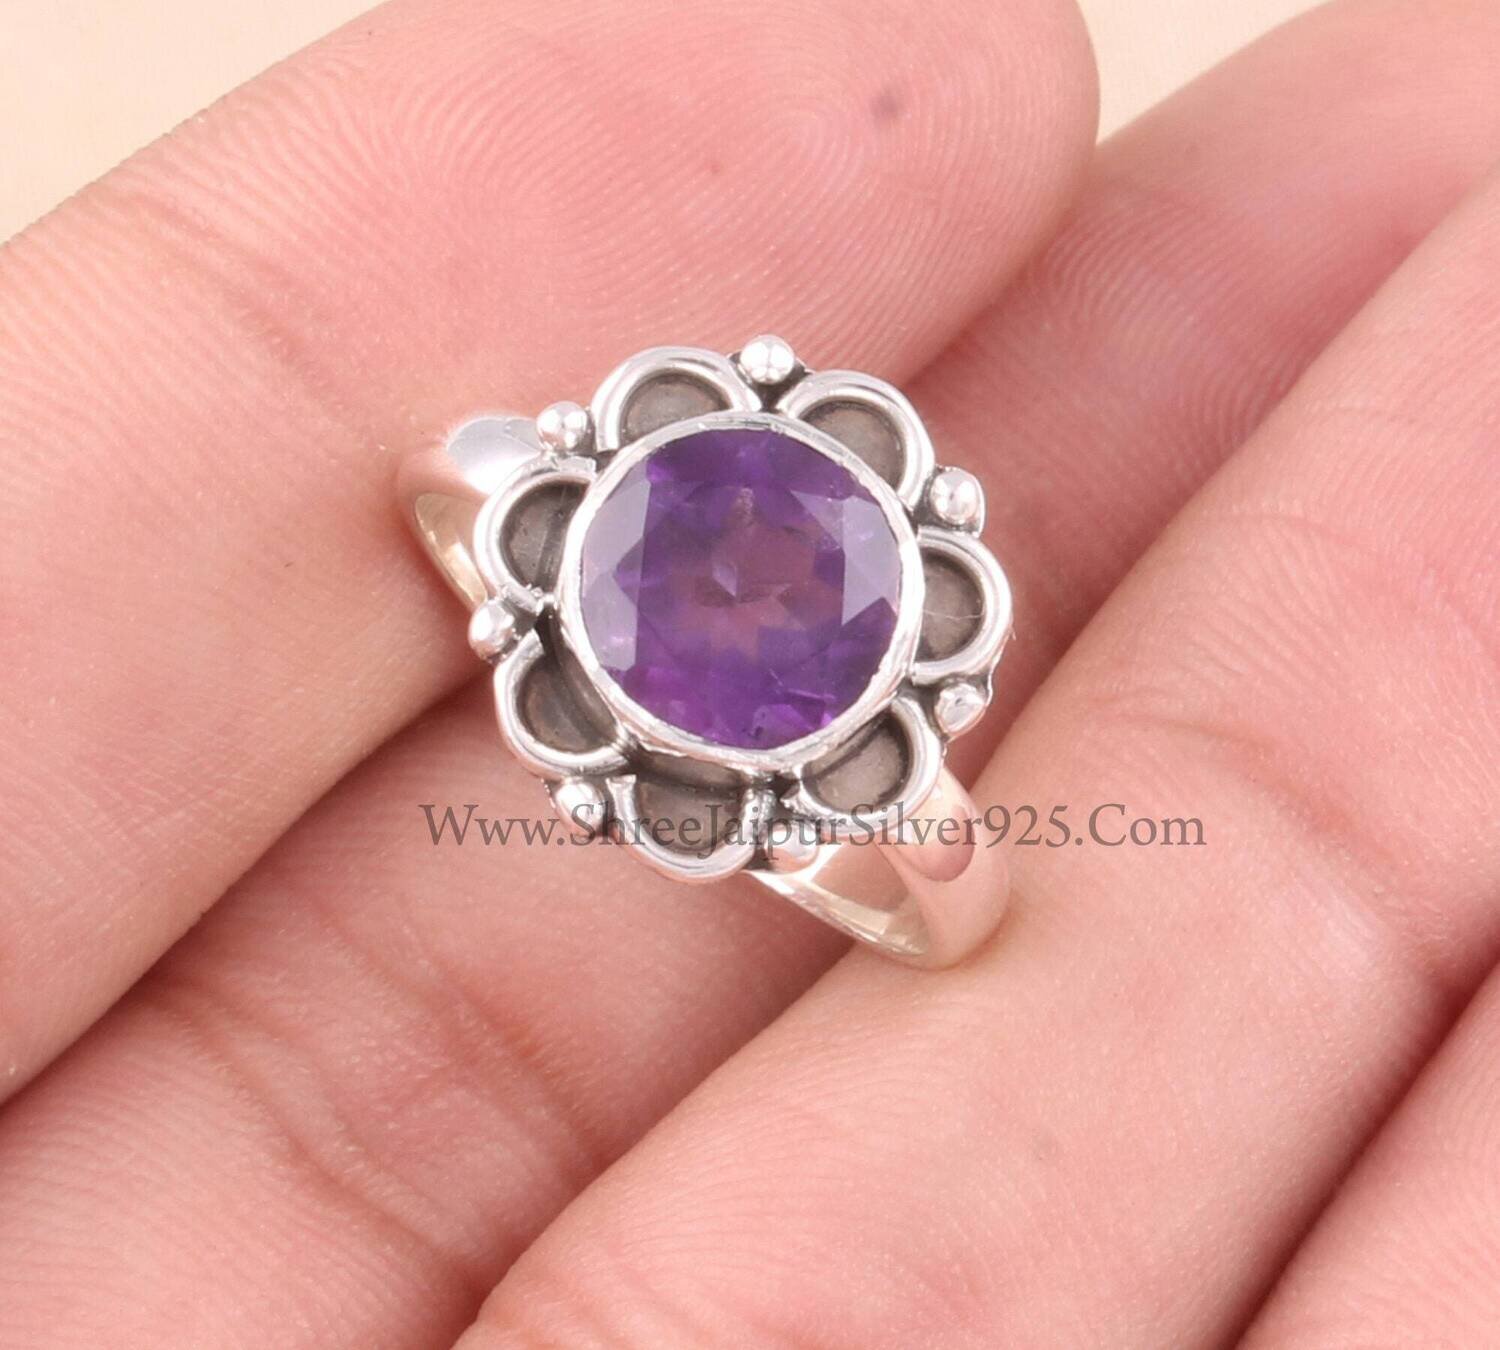 Natural Amethyst Round Cut Stone Solid 925 Sterling Silver Ring For Women, Handmade Silver Floral Designer Ring For Wedding Anniversary Gift